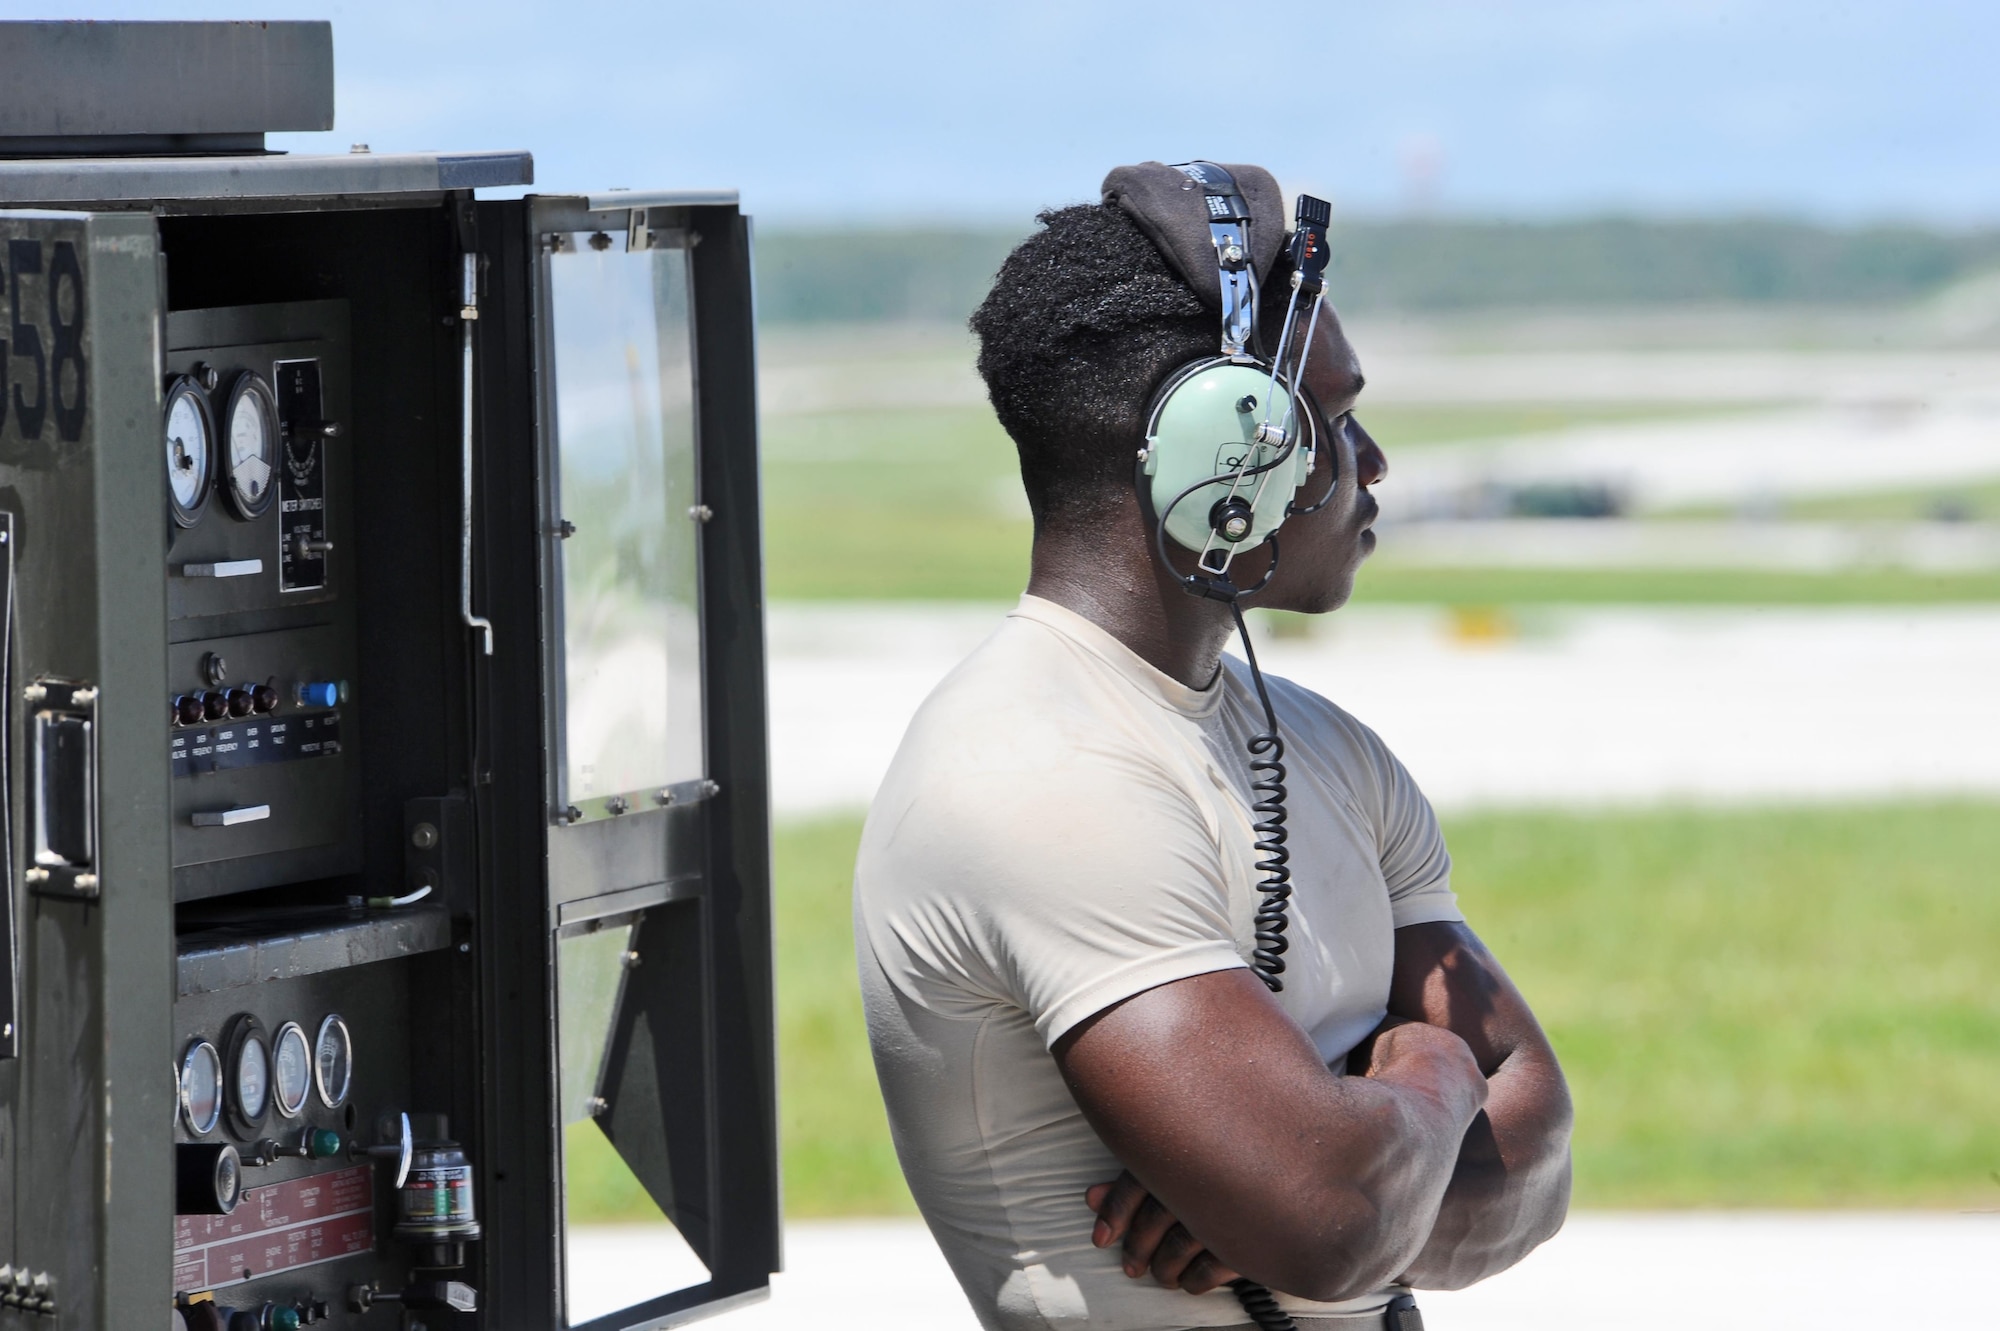 U.S. Air Force Staff Sgt. Elijah Fleming, a crew chief assigned to the 509th Aircraft Maintenance Squadron from Whiteman Air Force Base, Mo., waits for communication near a generator during pre-flight checks at Andersen Air Force Base, Guam, Aug. 10, 2016. Bomber training missions ensure crews maintain a high state of readiness and proficiency and demonstrate their ability to provide an always-ready global strike capability. (U.S. Air Force photo by Tech. Sgt. Miguel Lara III)